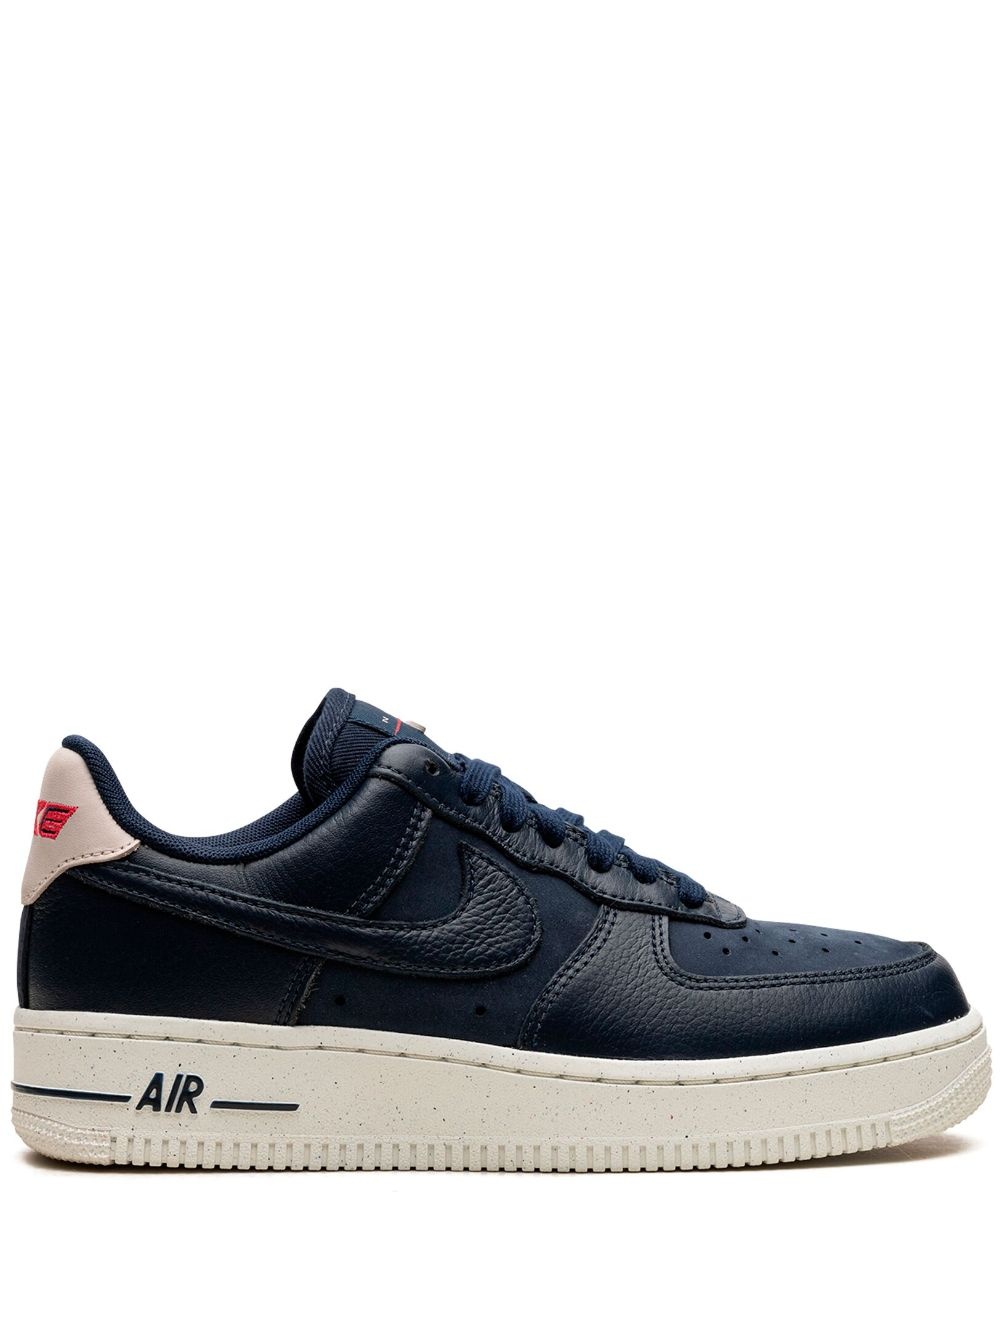 Air Force 1 '07 LX "Obsidian" sneakers - 1